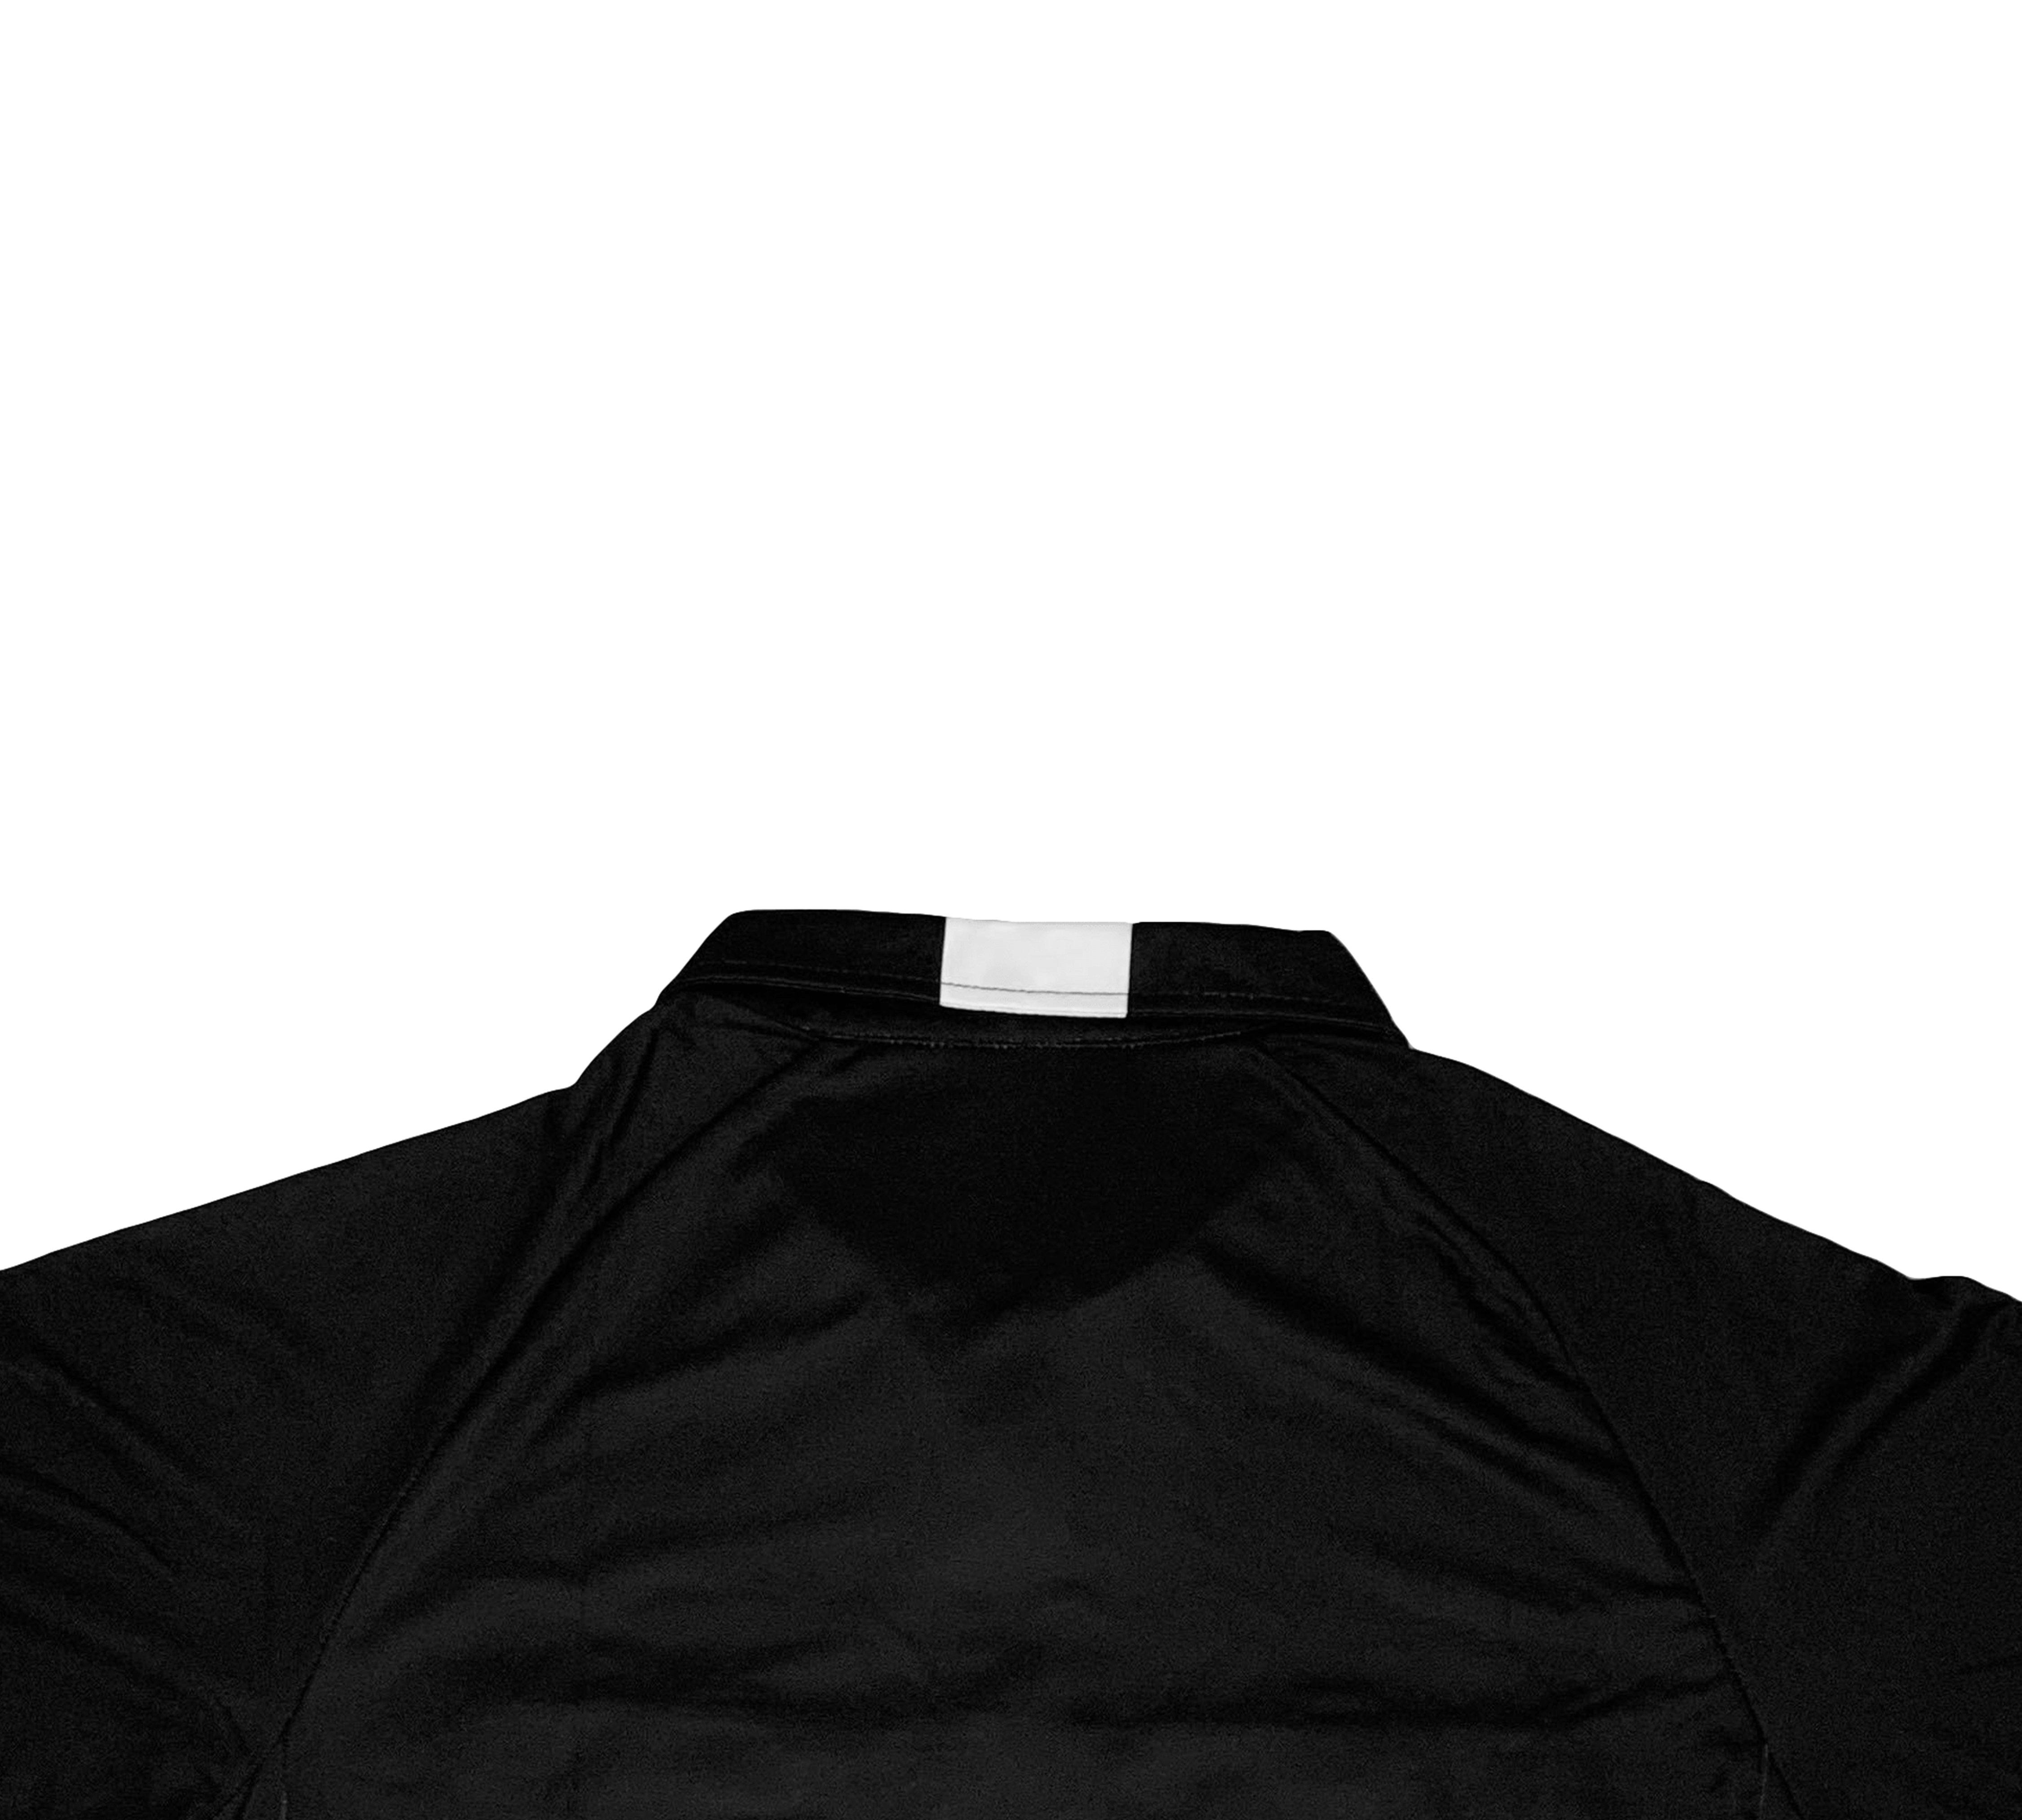 Mitre Soccer Referee Jersey Black and White, Large 